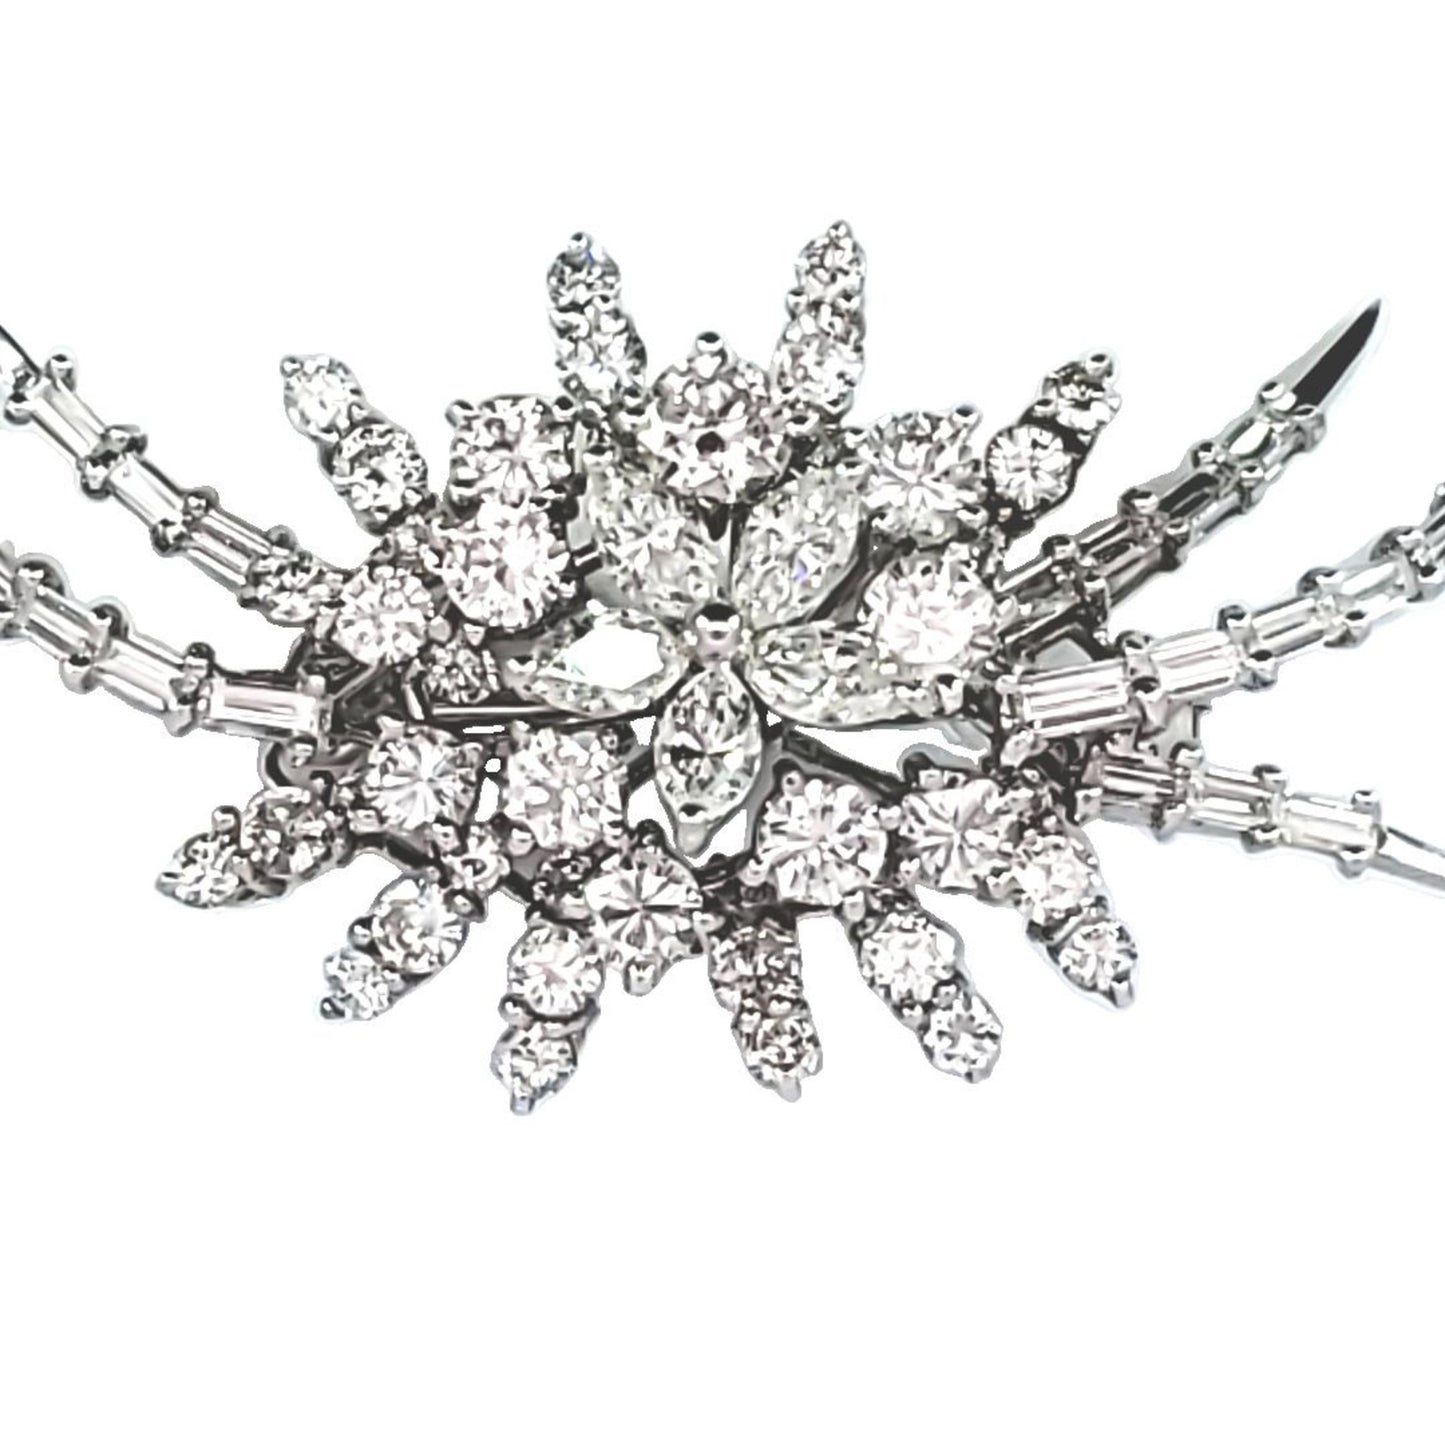 1970s 14KT White Gold Diamond Brooch close-up front